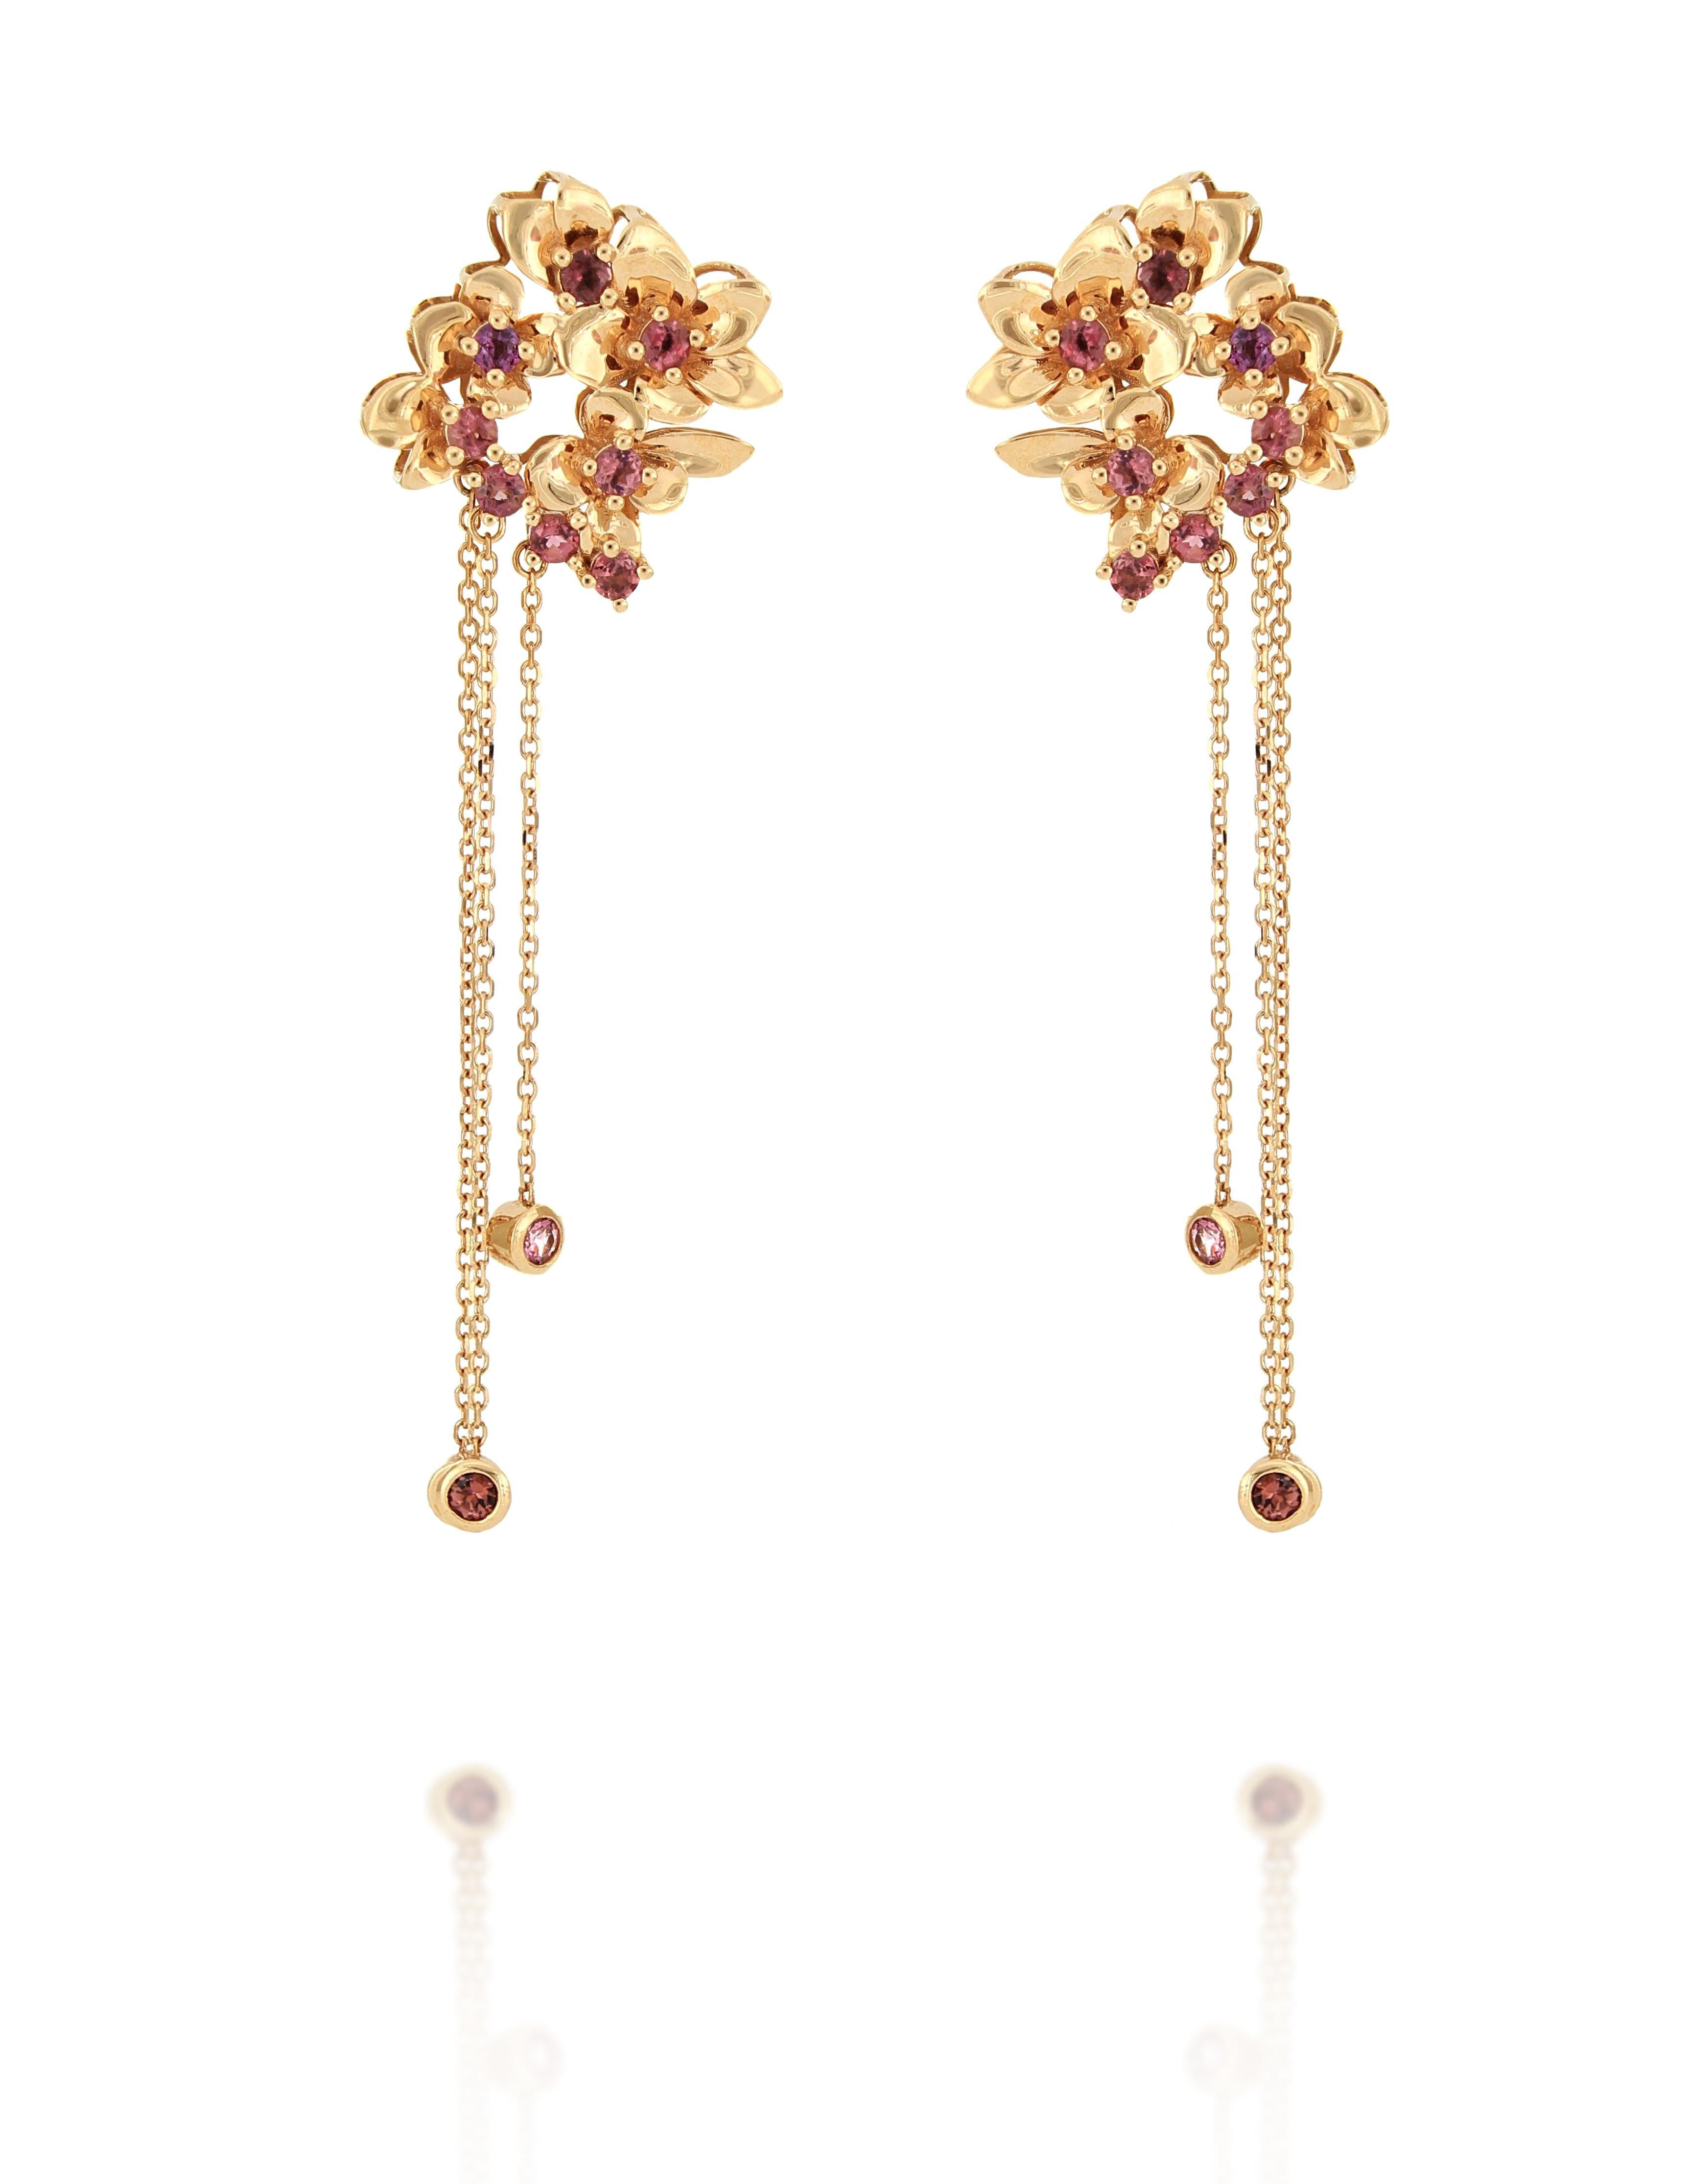 This beautiful pair of earrings Is designed in floral patterns ,set with 22 pieces of pink tourmaline weighing 1.4 carats, mounted in 18 karat rose gold.
O’Che 1867 was founded one and a half centuries ago in Macau. The brand is renowned for its